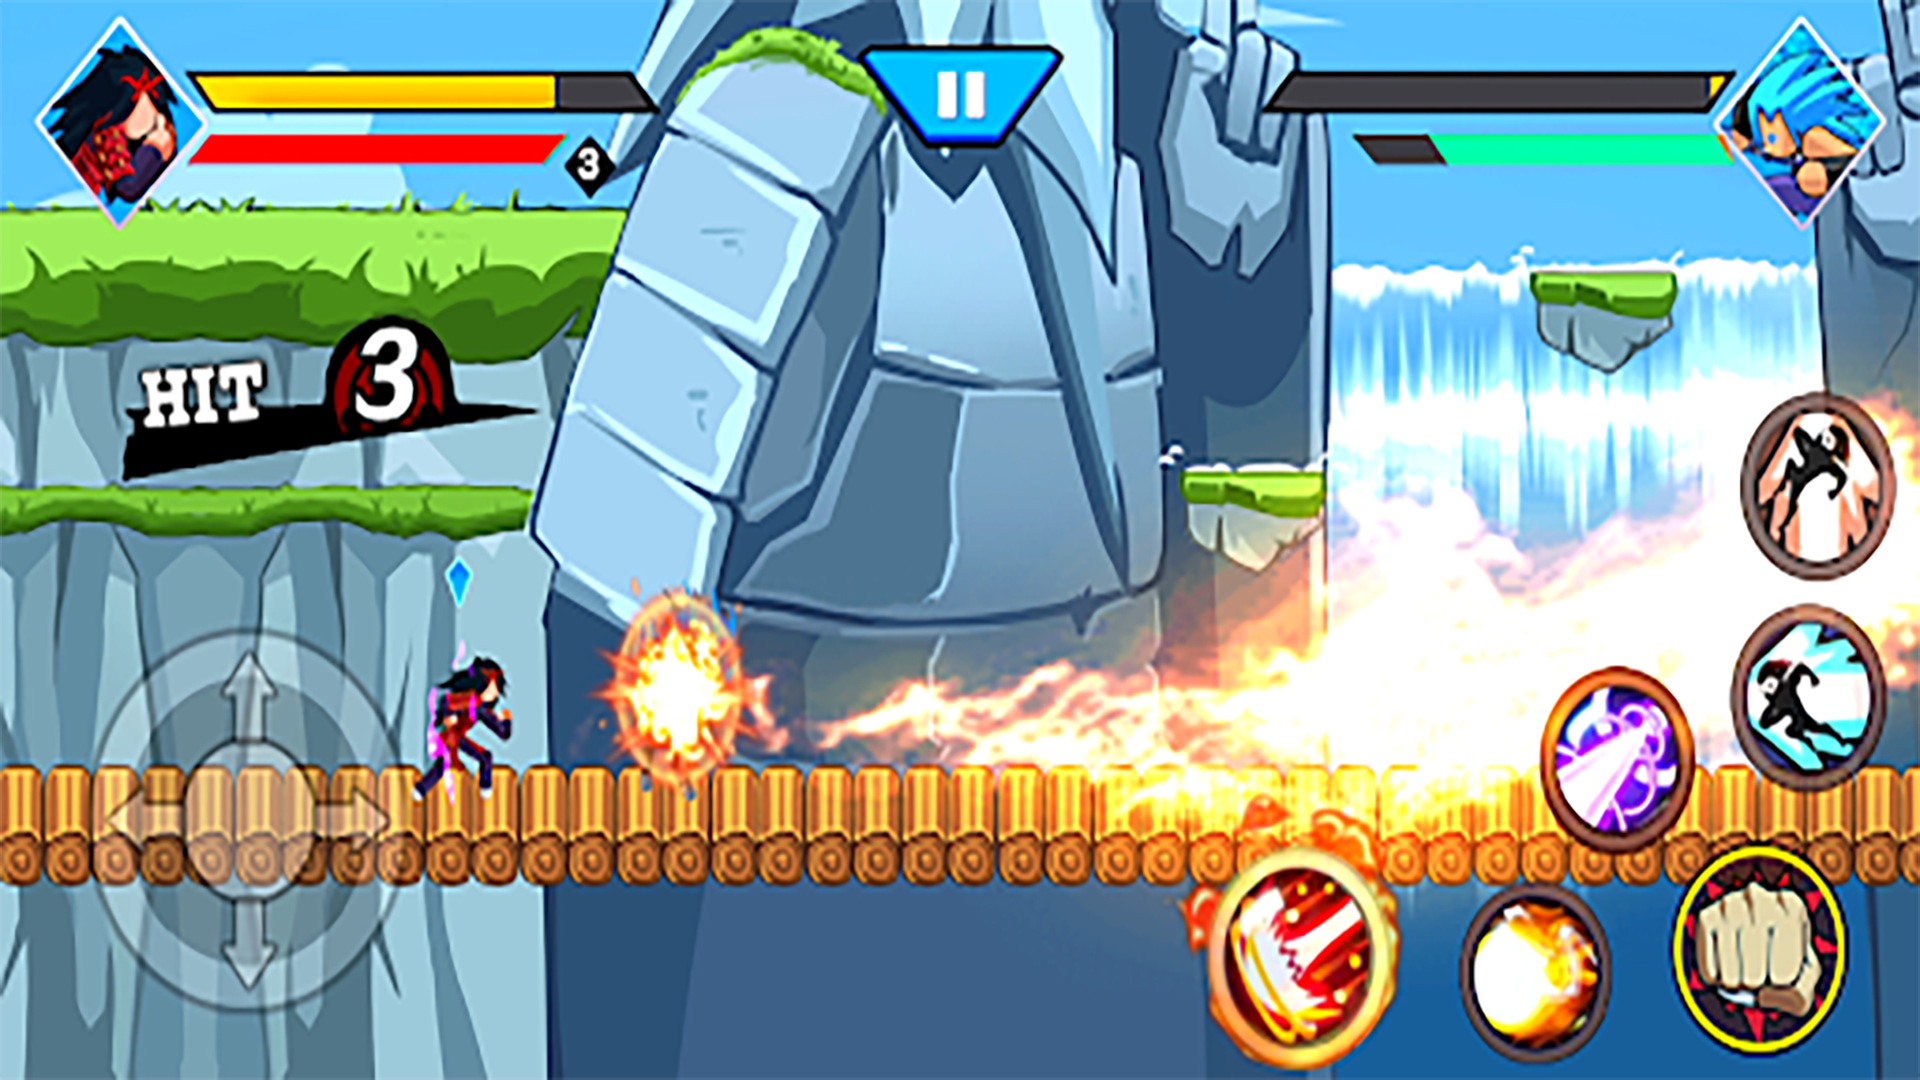 Ultimate Ninja Stickman Fighting::Appstore for Android